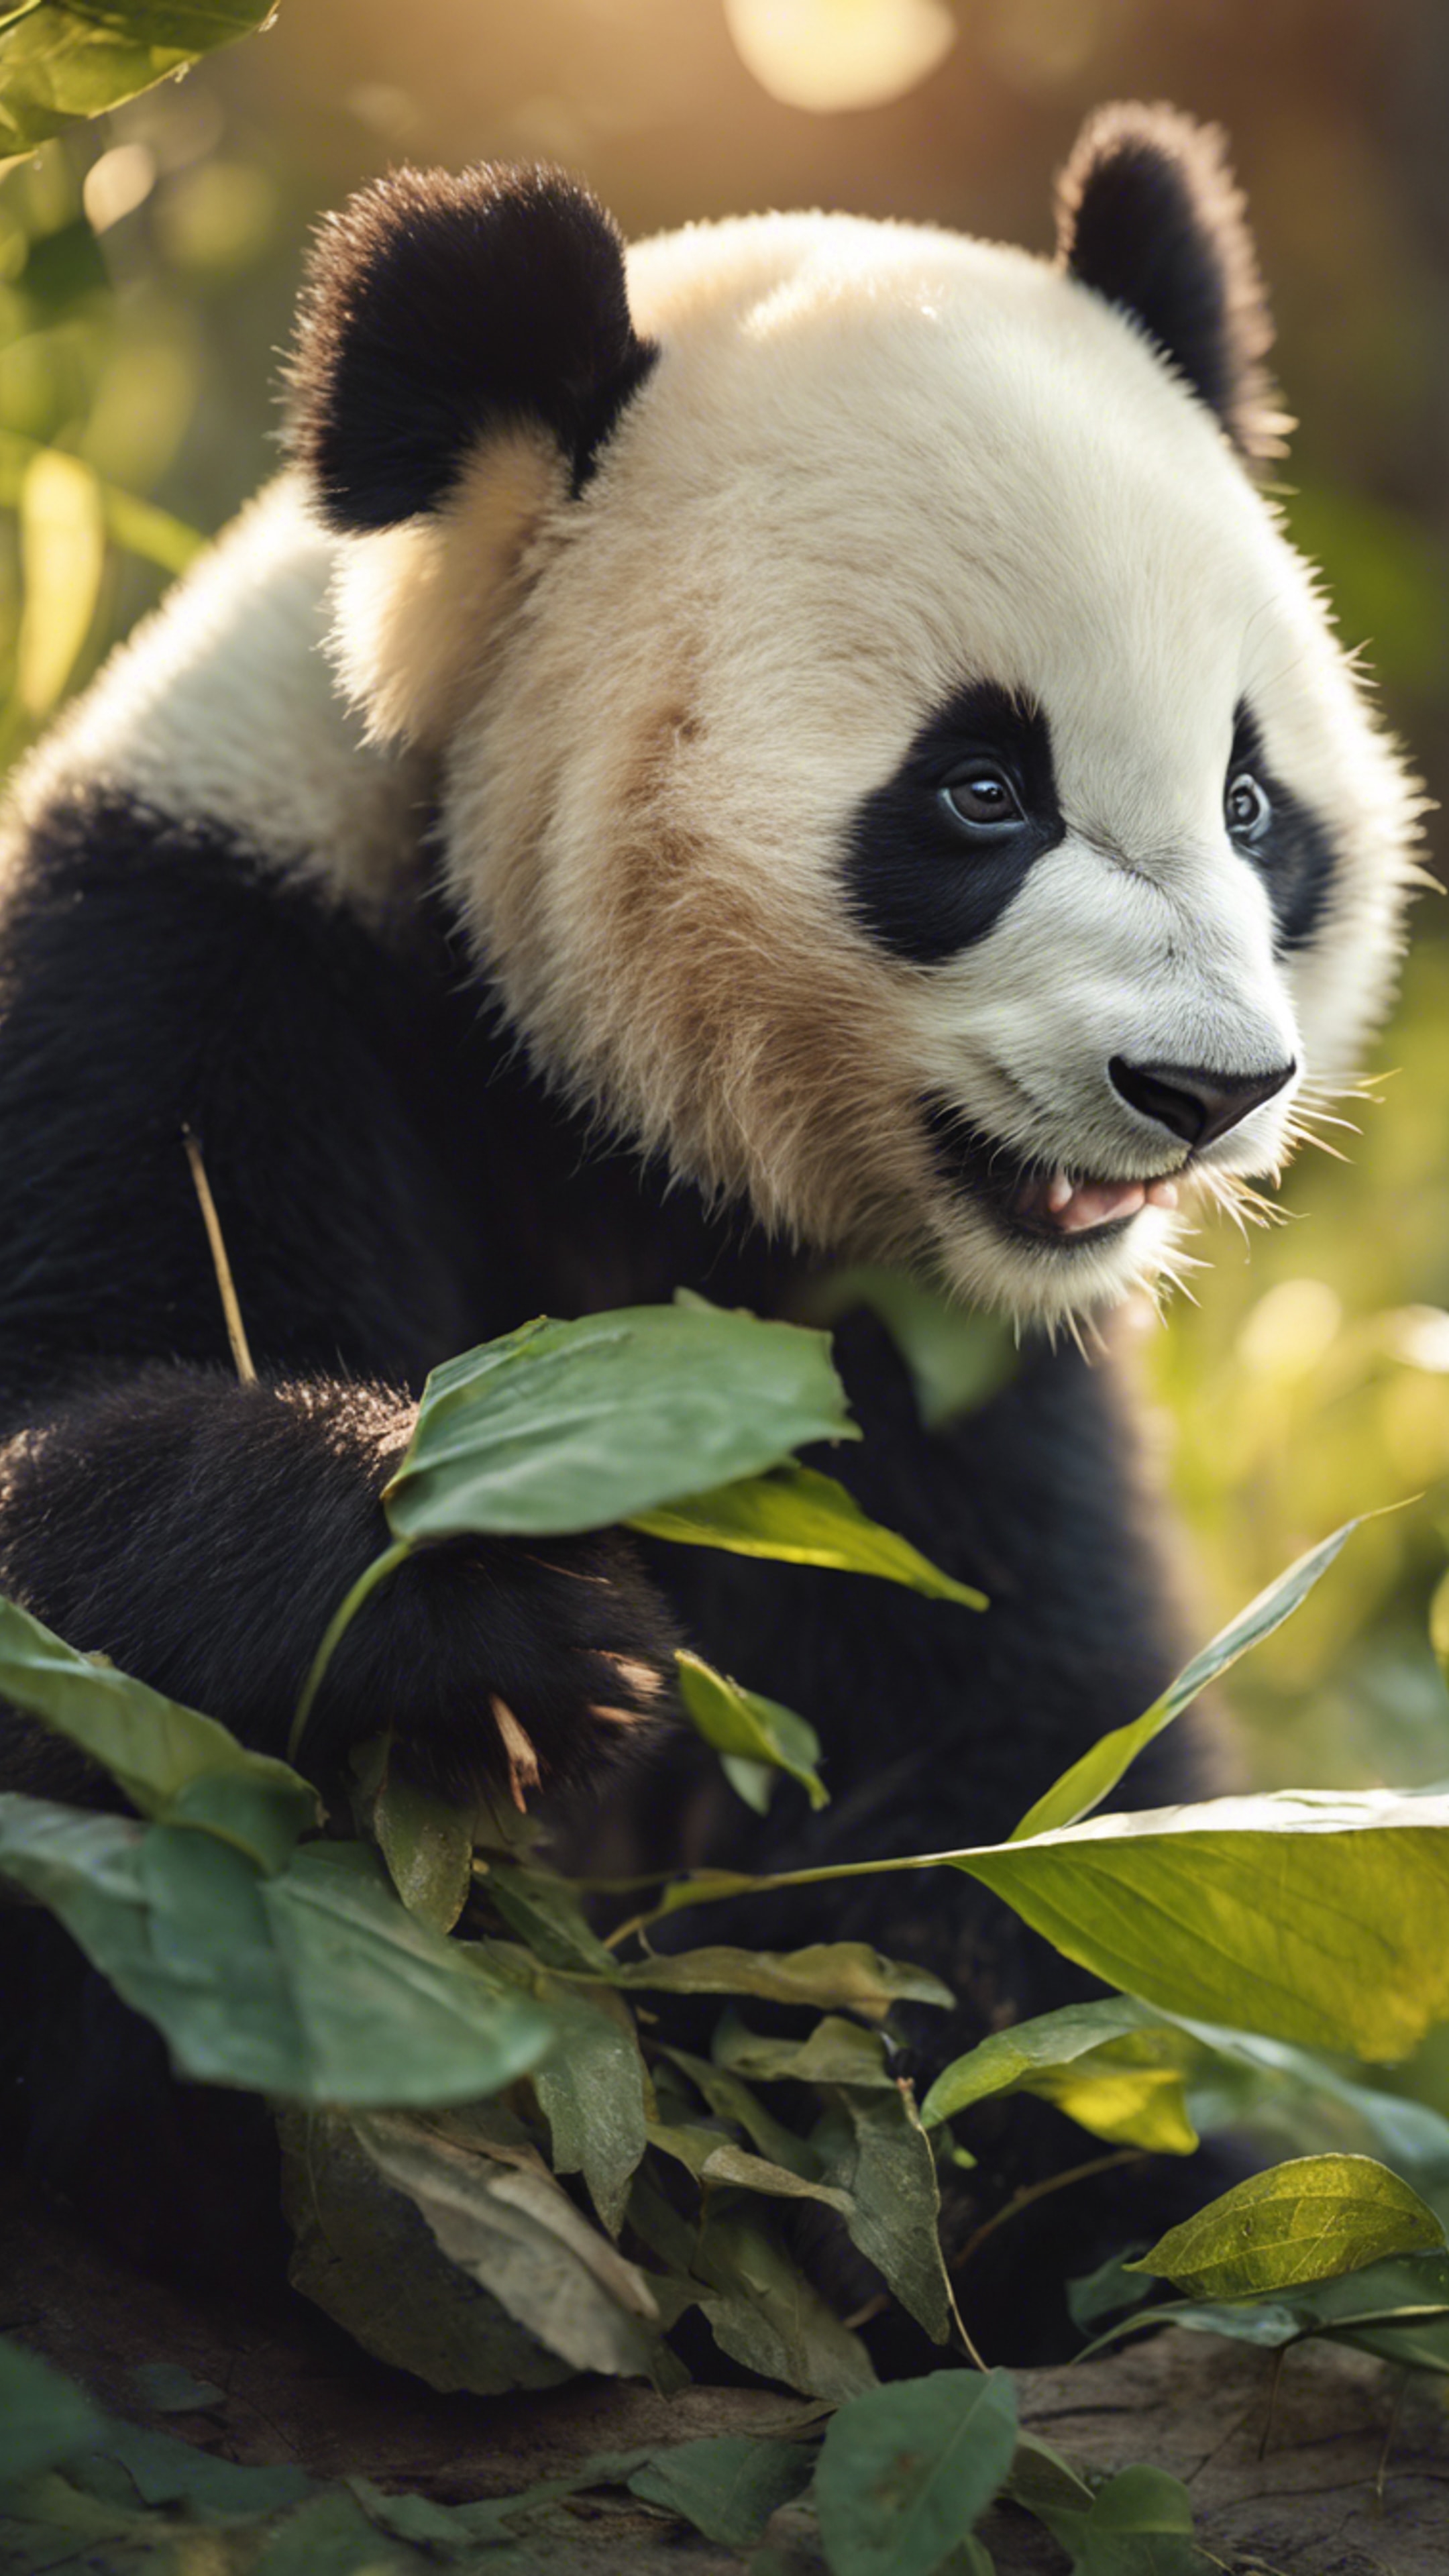 A young panda bear adorably nibbling on a leaf in the soft glow of morning light. Tapeta[df98dc8ca776441d85bc]